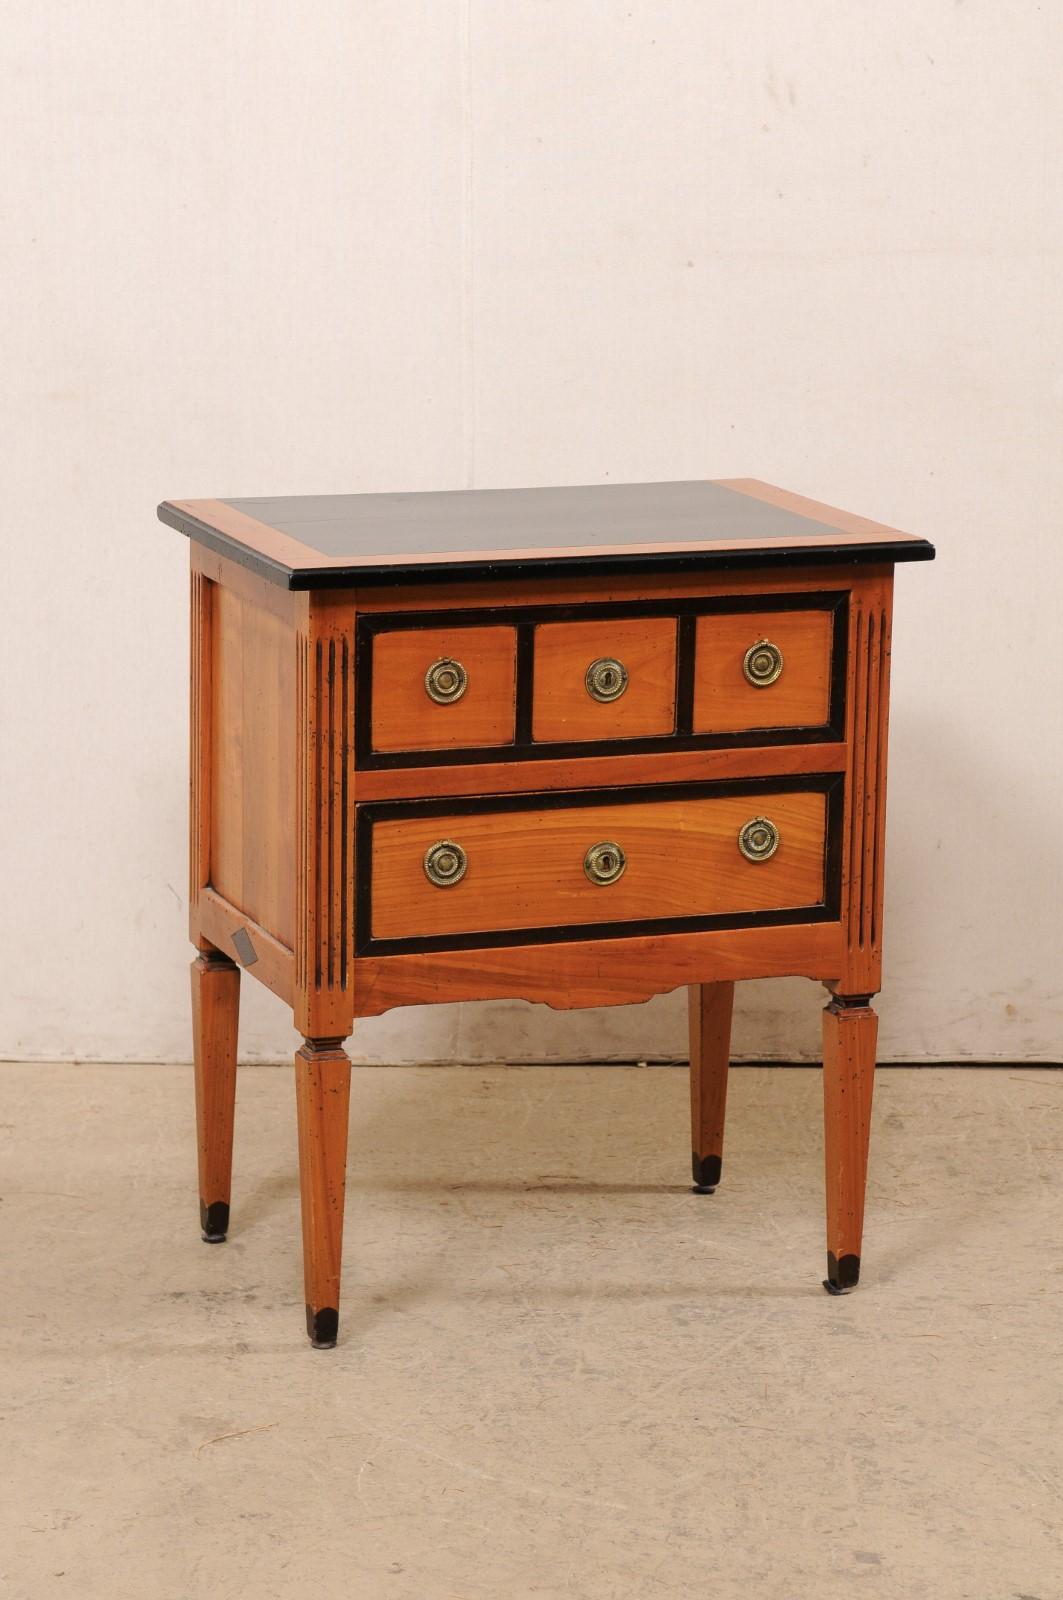 An American wood-carved raised side chest with drawers, circa 1960's. This mid-century commode was created 